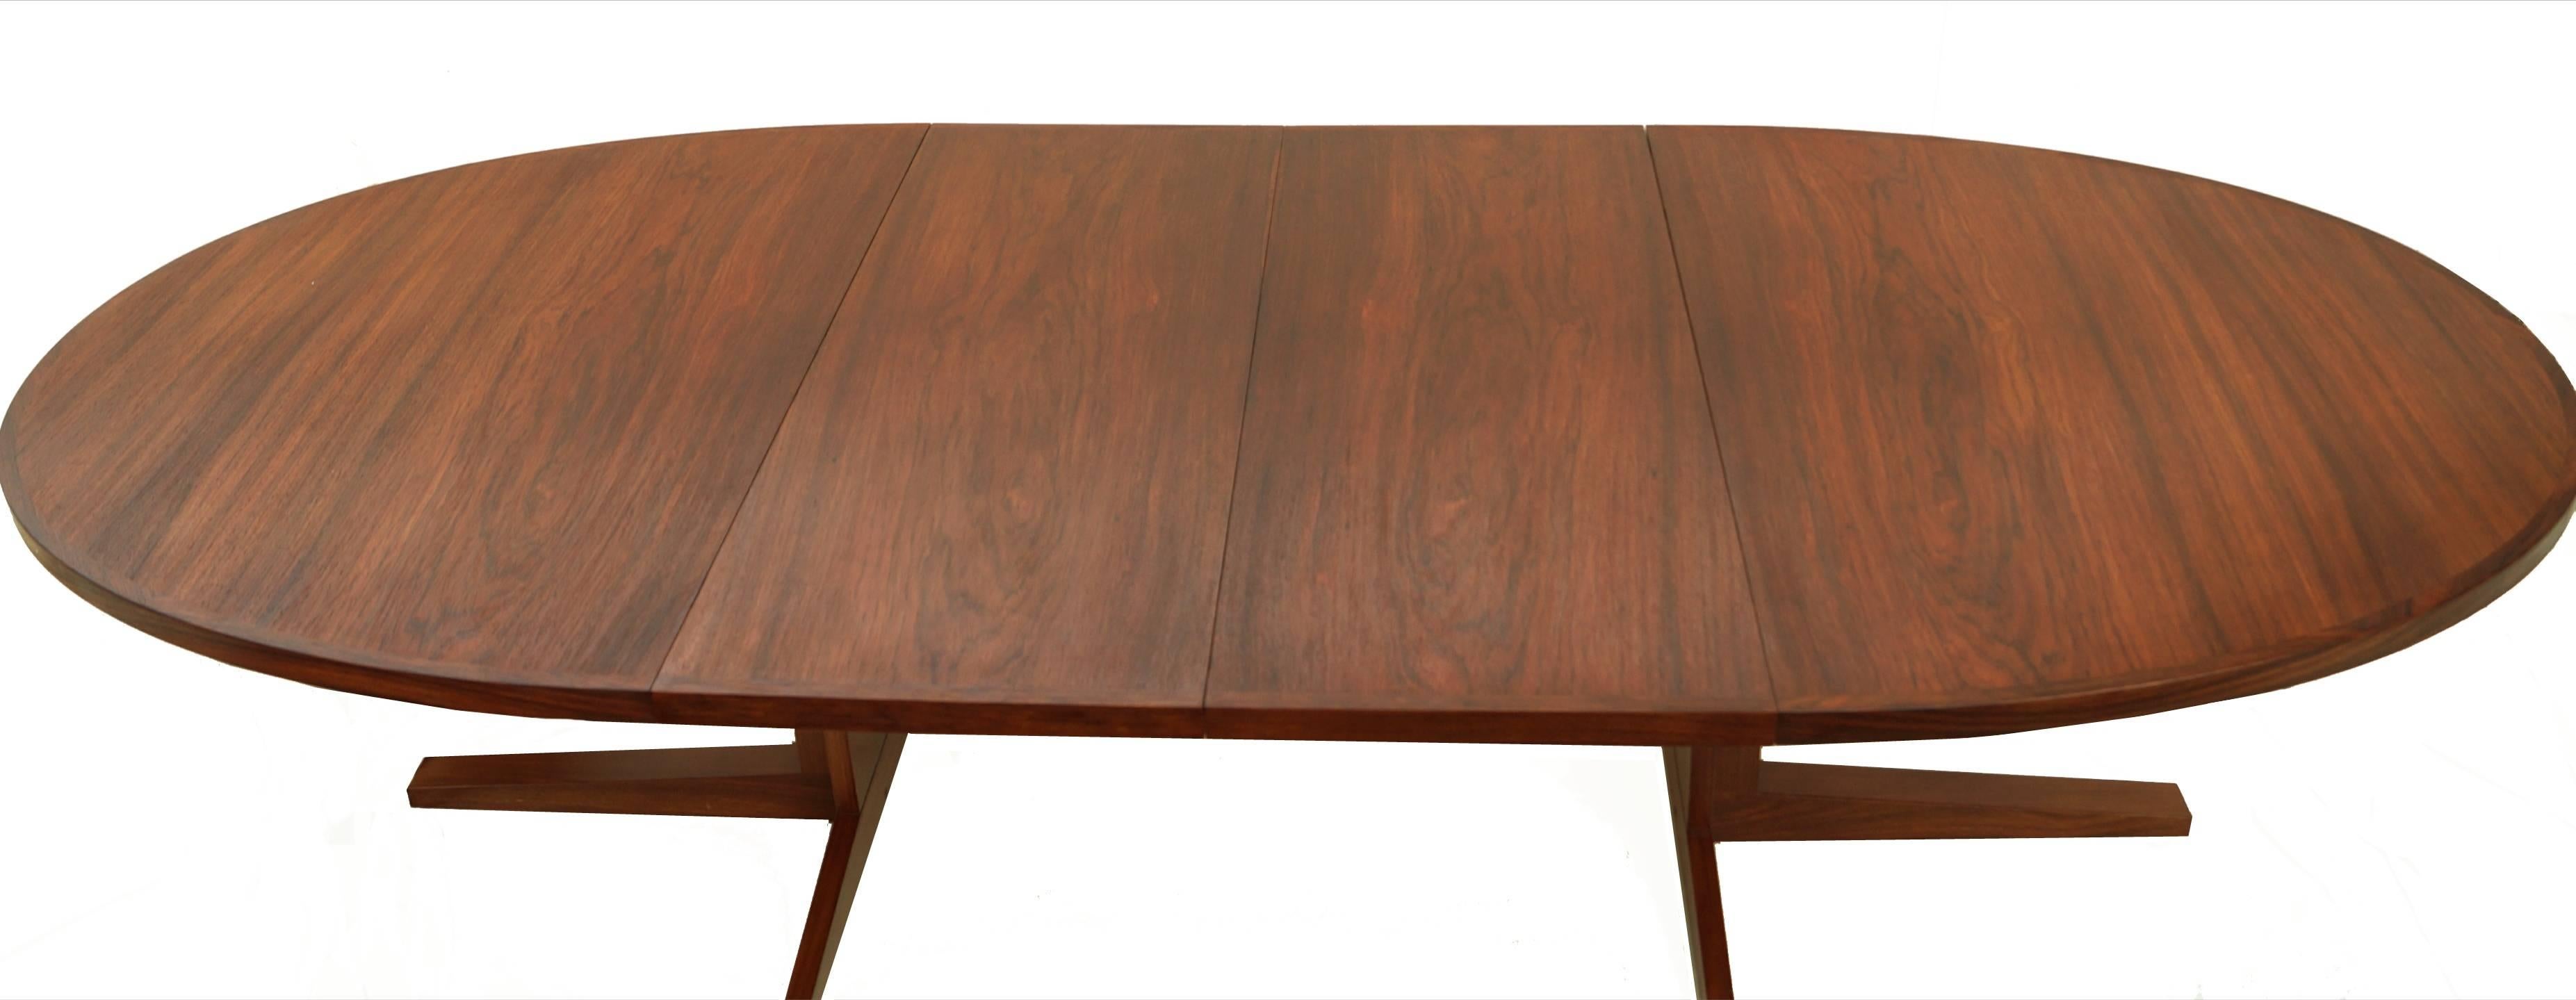 Danish John Mortensen Expandable Rosewood Dining Conference Table